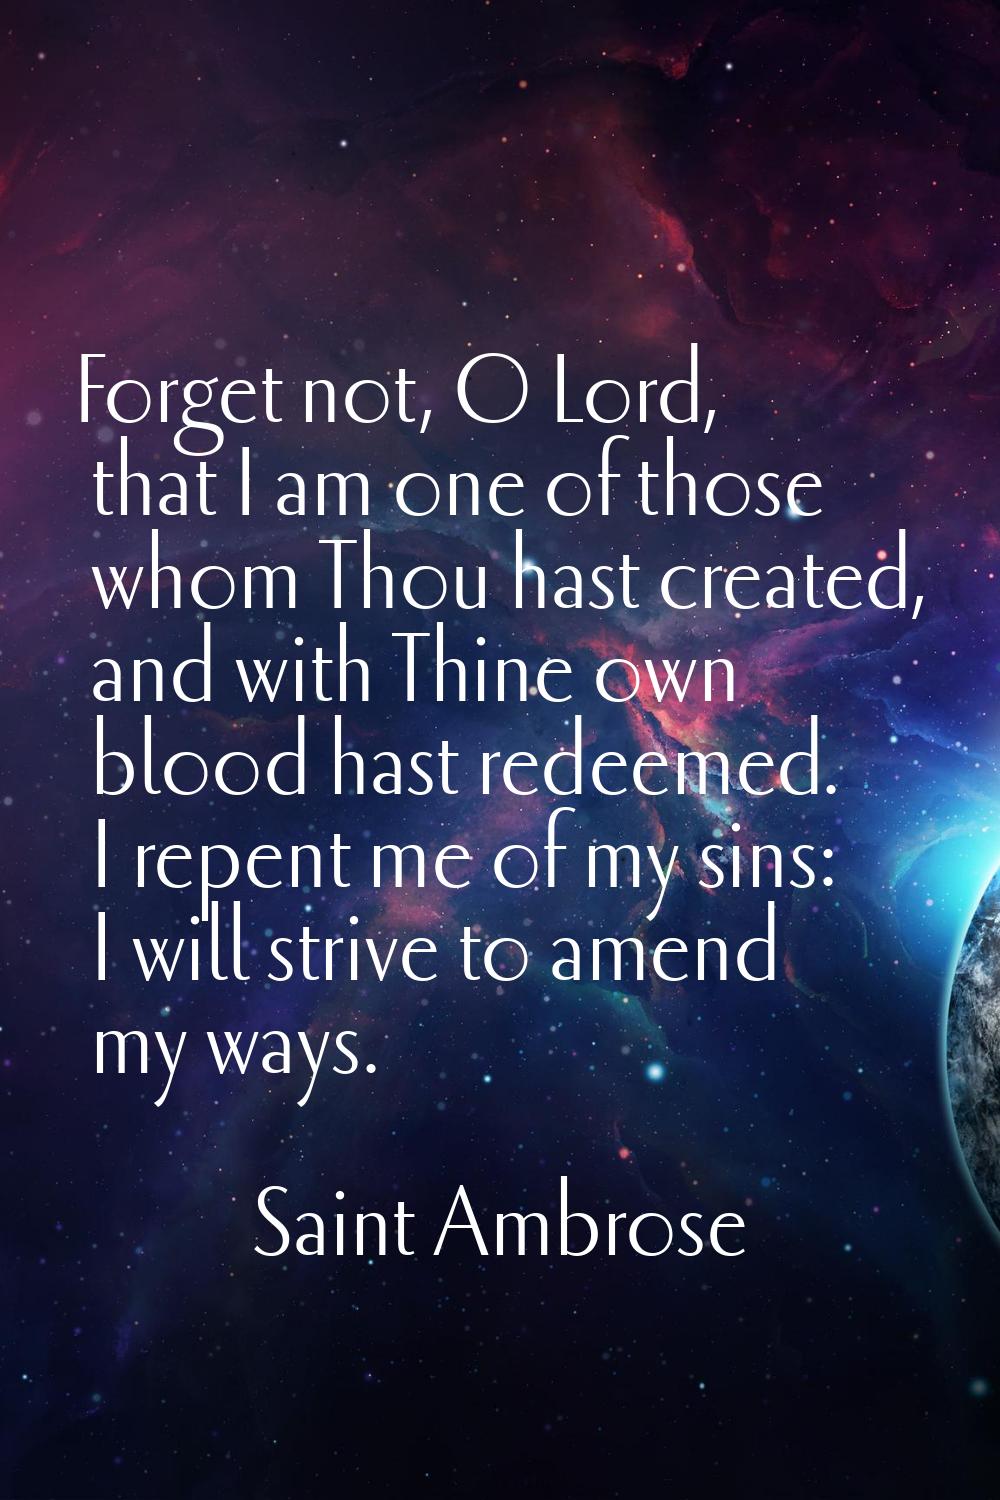 Forget not, O Lord, that I am one of those whom Thou hast created, and with Thine own blood hast re